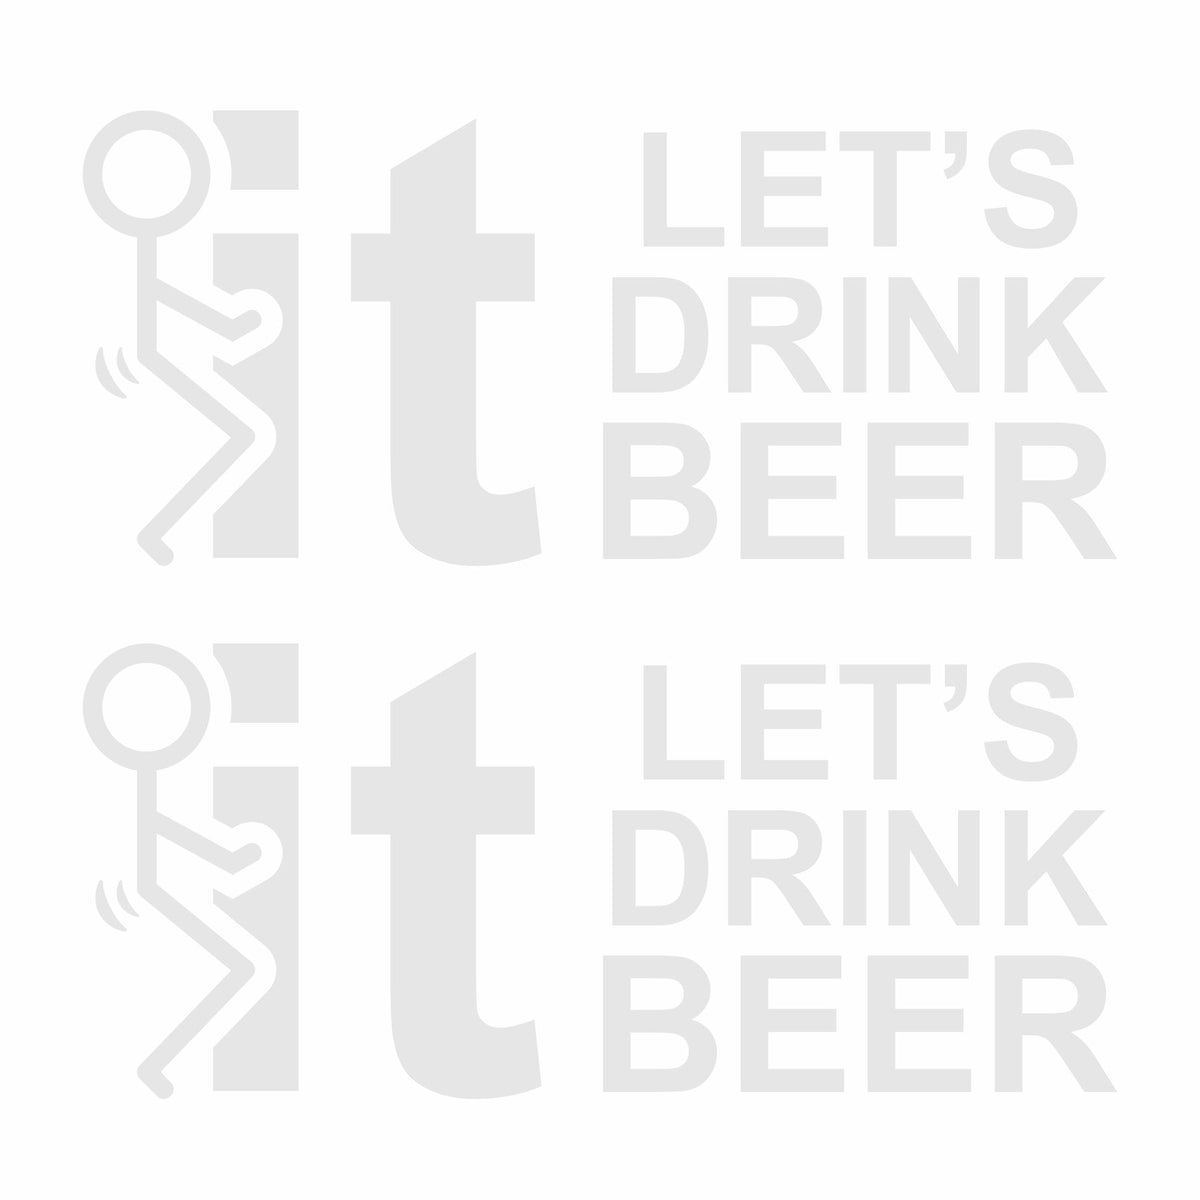 Fuck It Guy - Let's Drink Beer - Vinyl Decal - Free Shipping